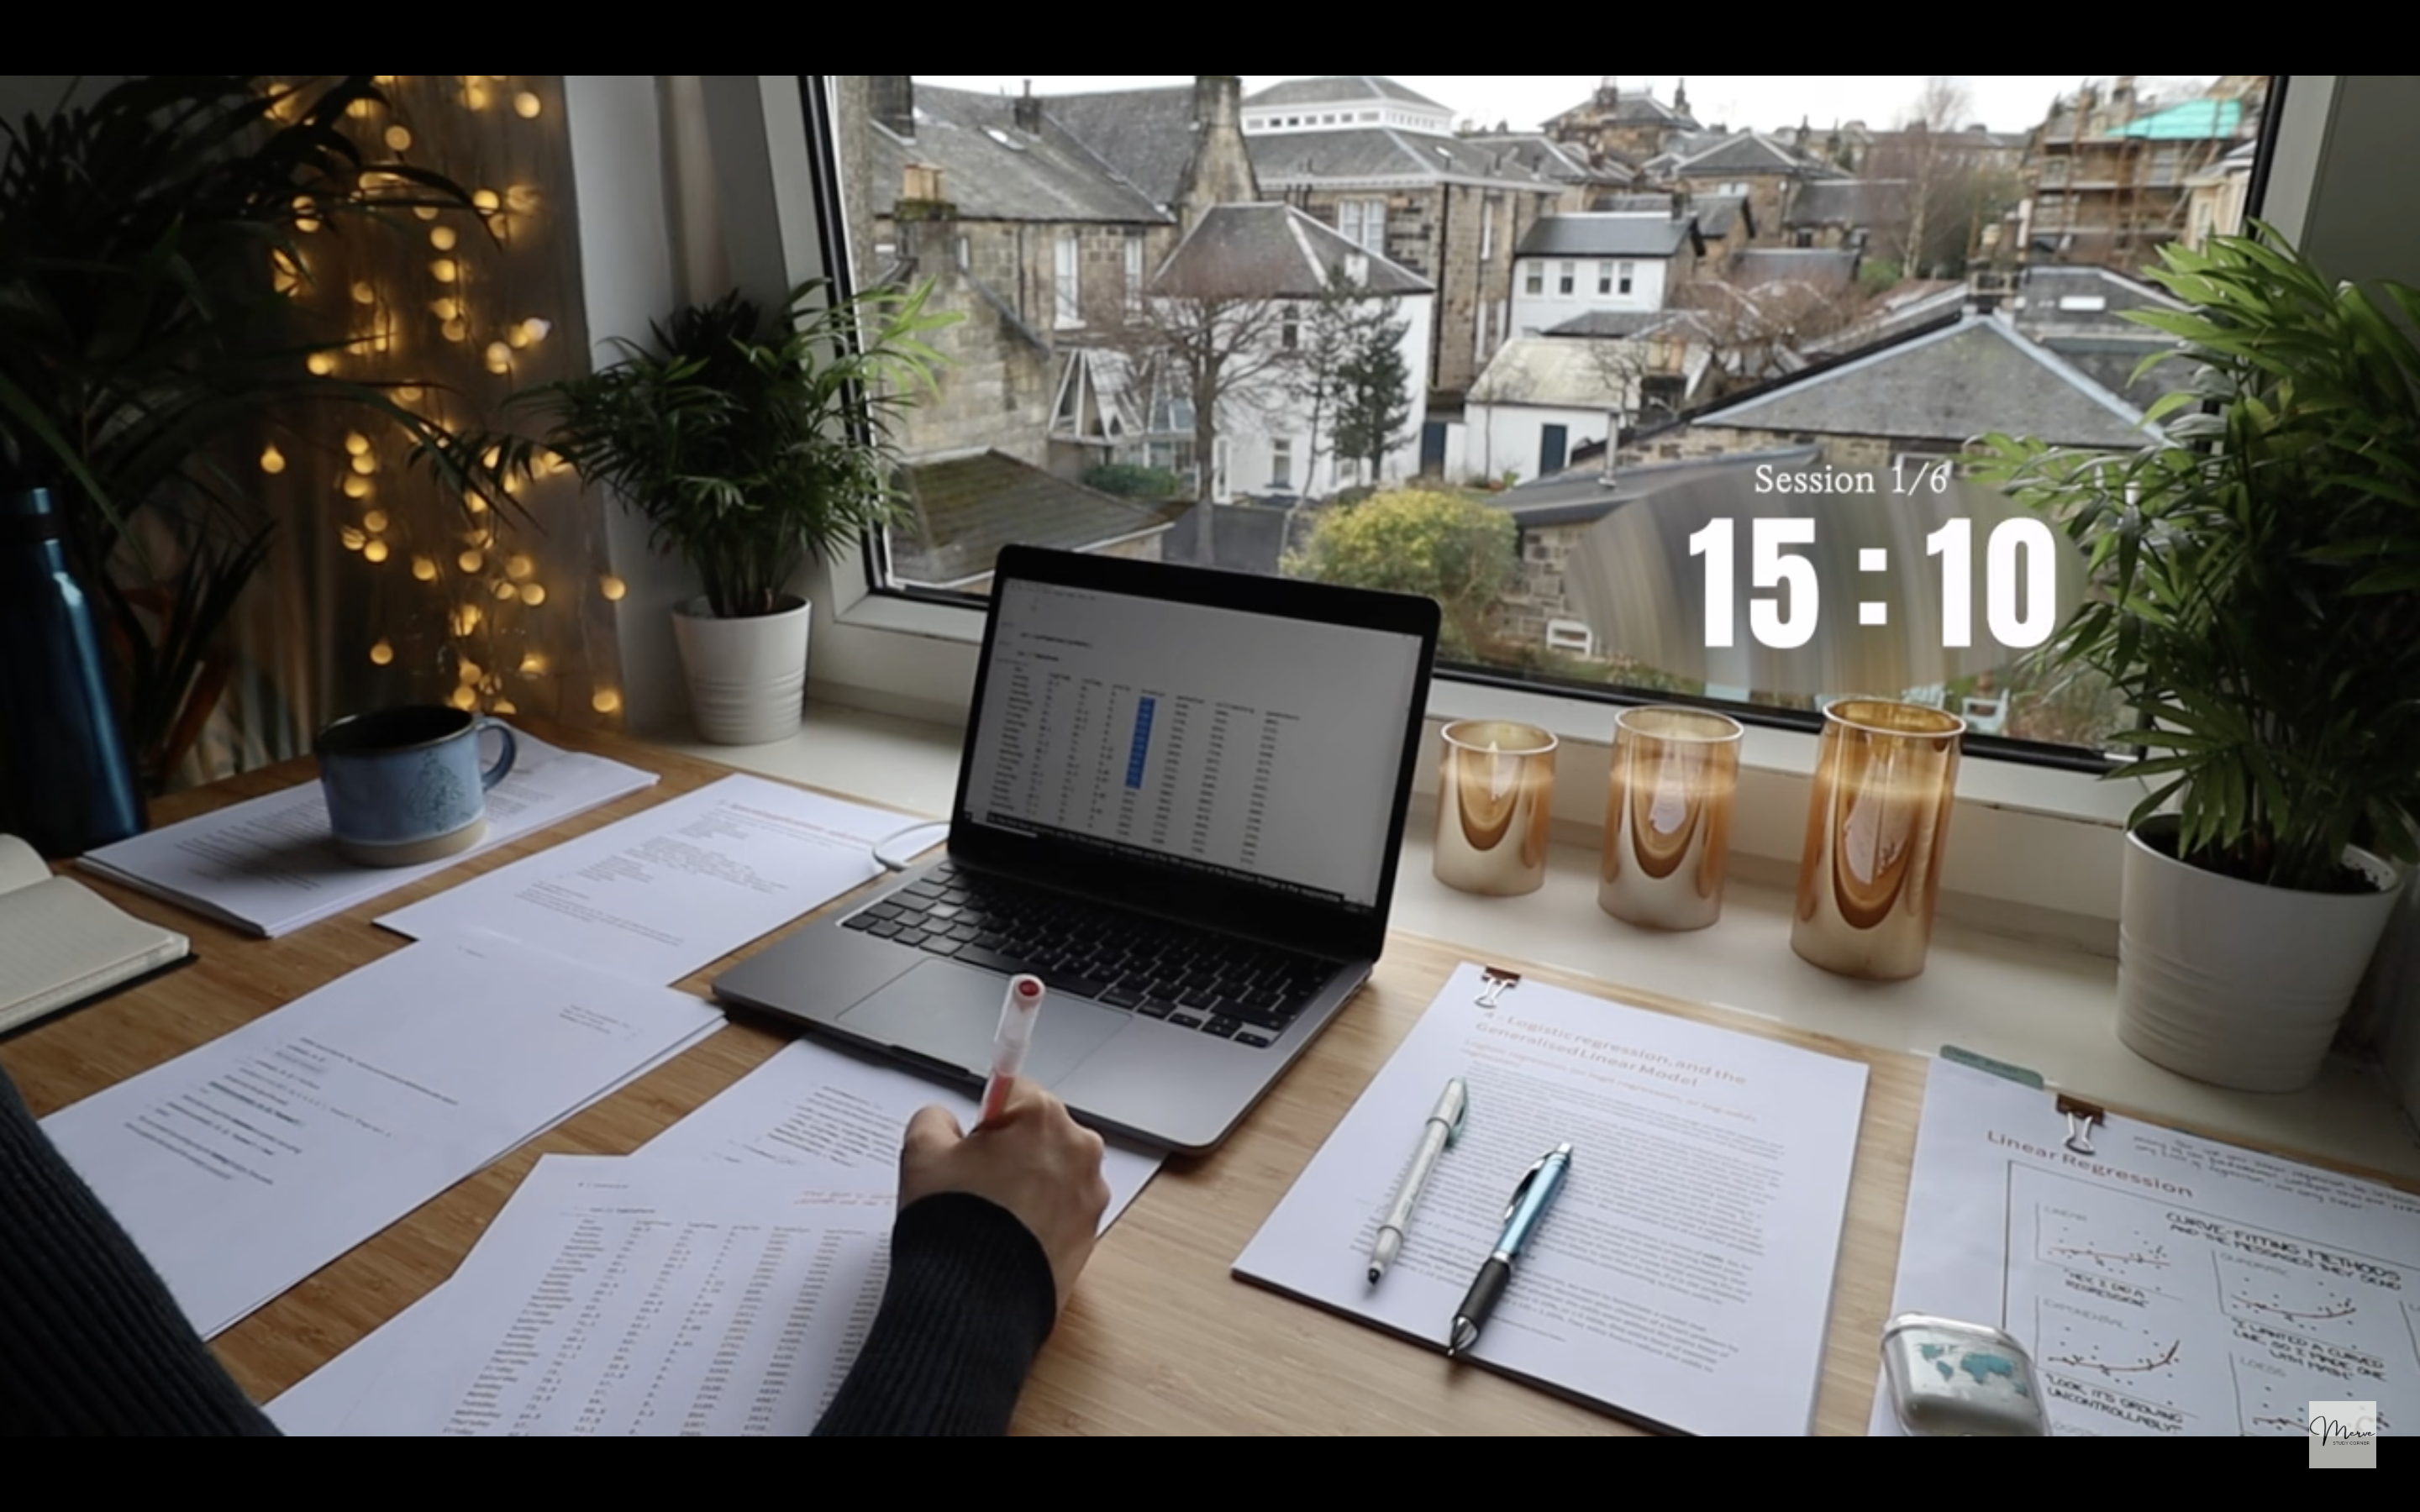 Screenshot of a "study with me" video uploaded by Merve. A person (face not visible) is sitting at a desk and looking at a laptop with papers strewn about. A timer on the screen reads "Session 1/6 15:10". 